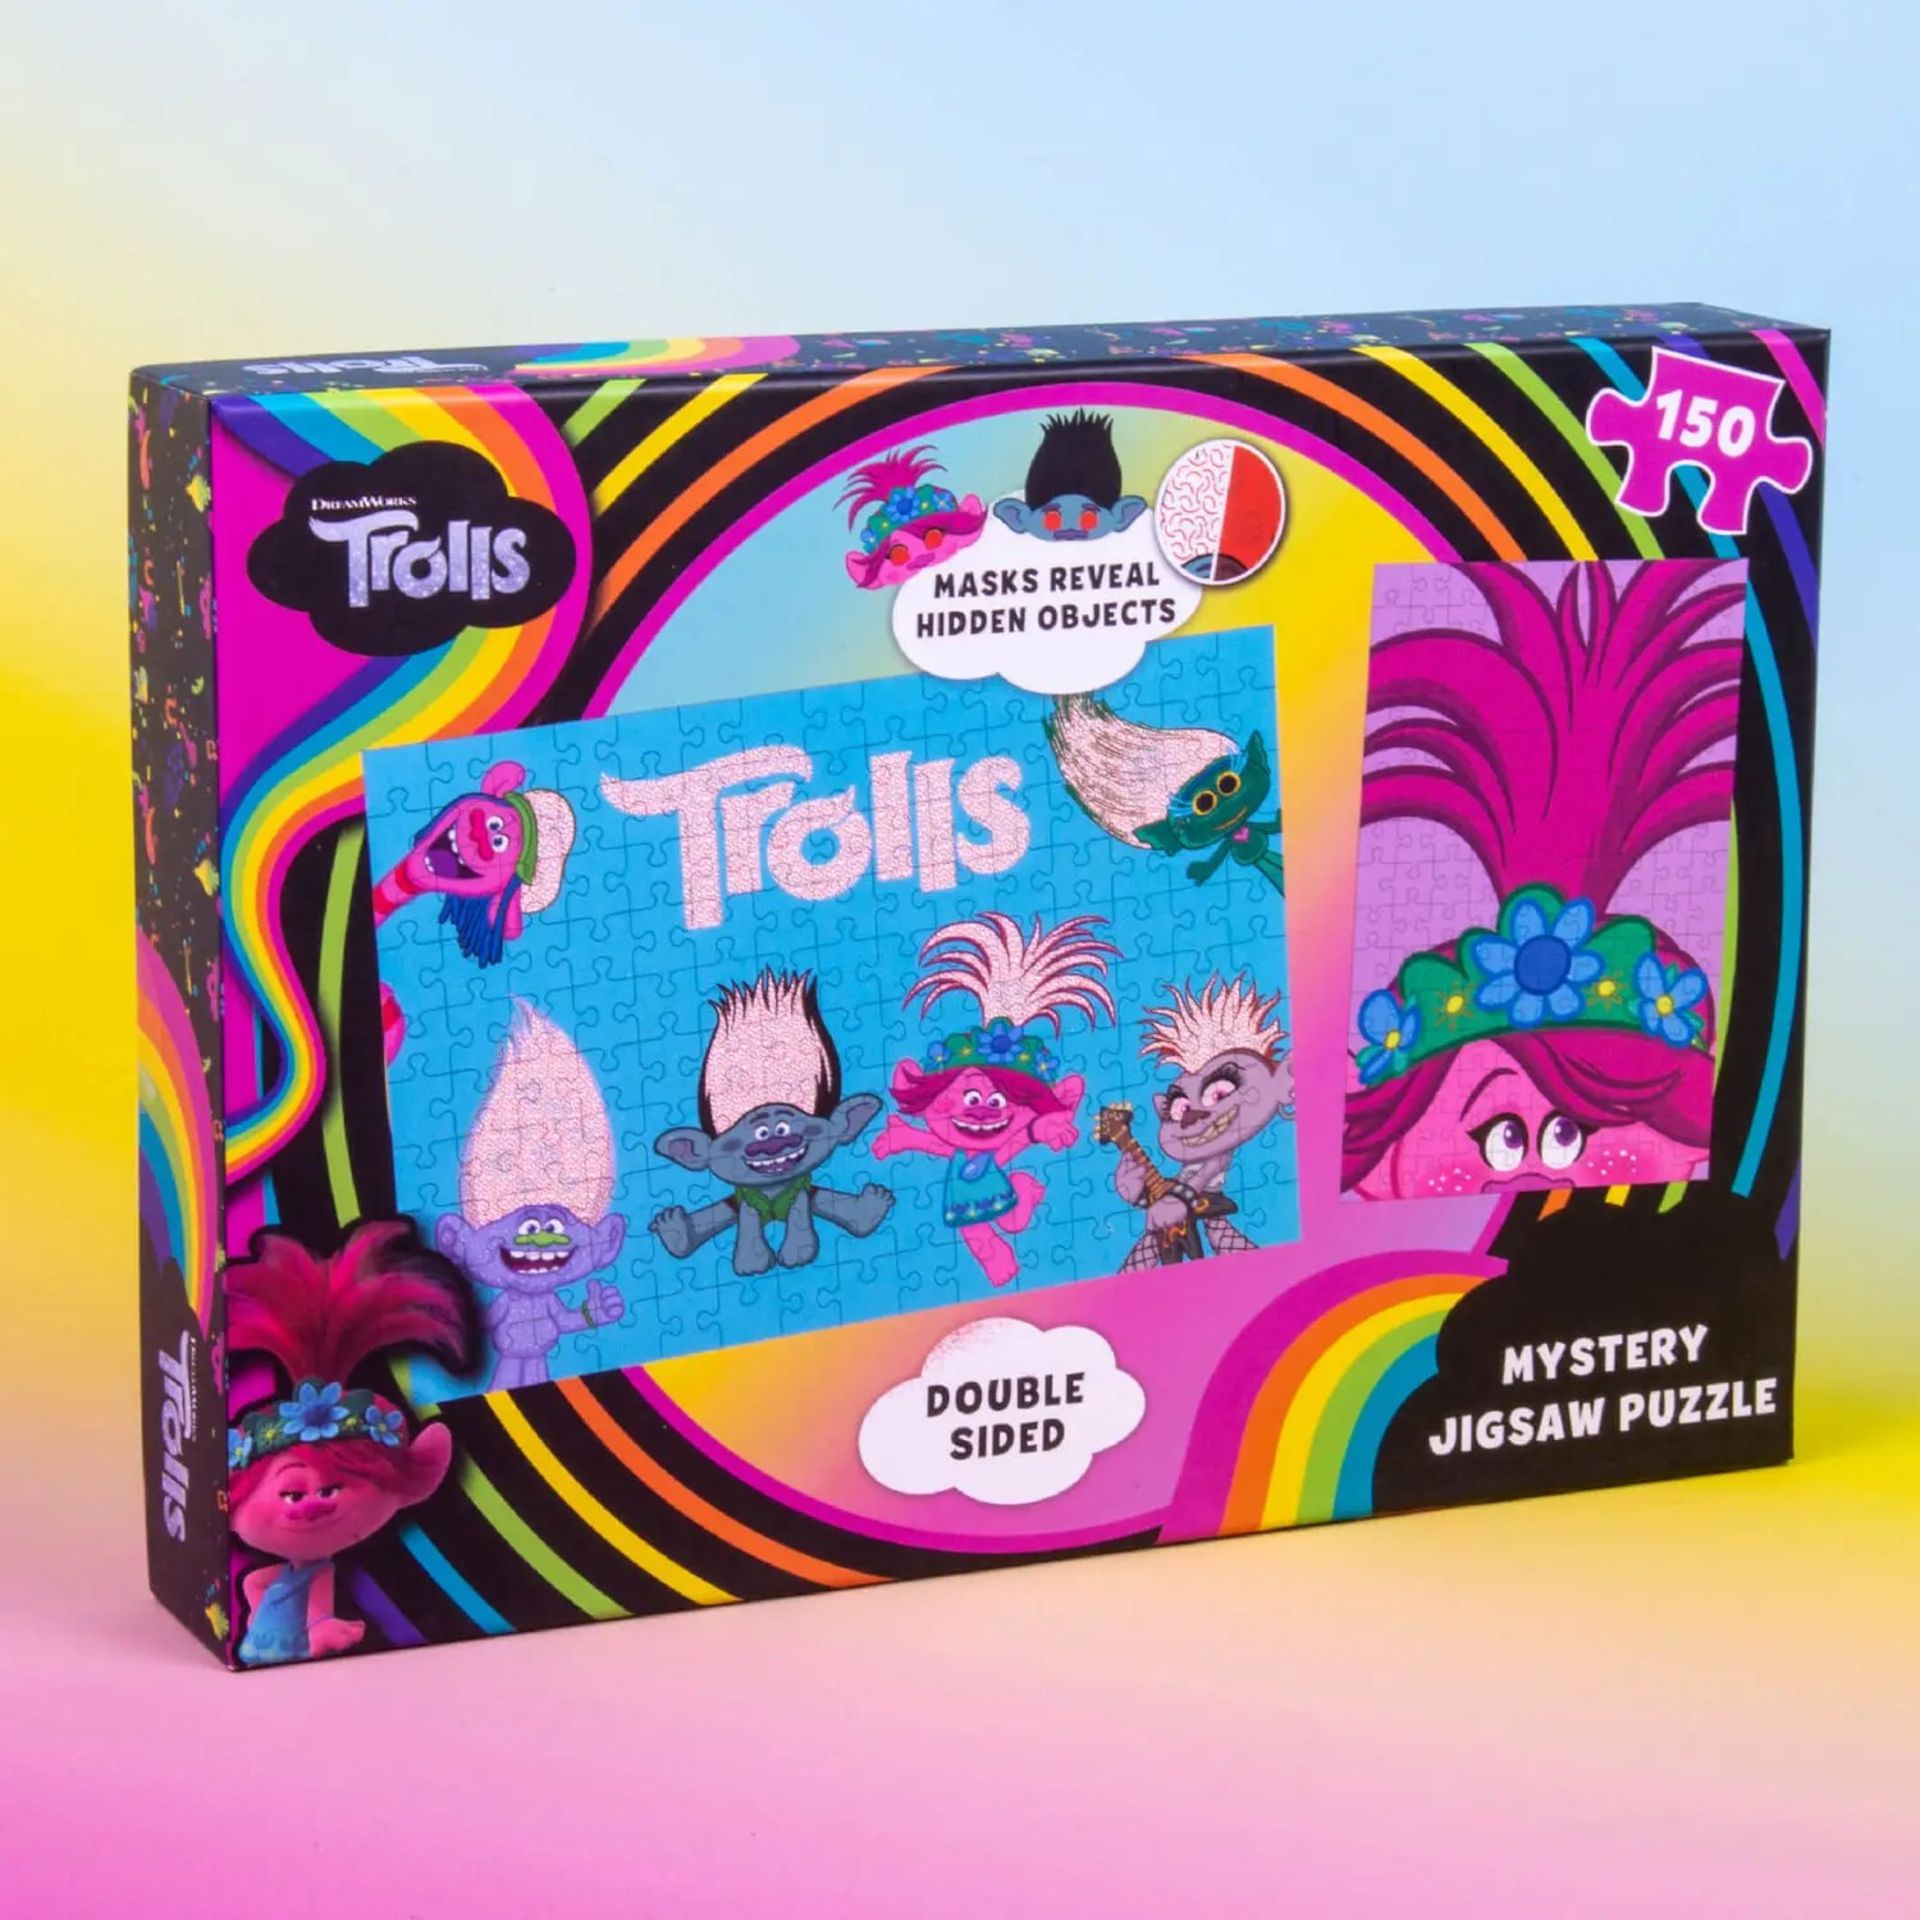 New Trolls Double Sided Mystery Jigsaw Puzzle